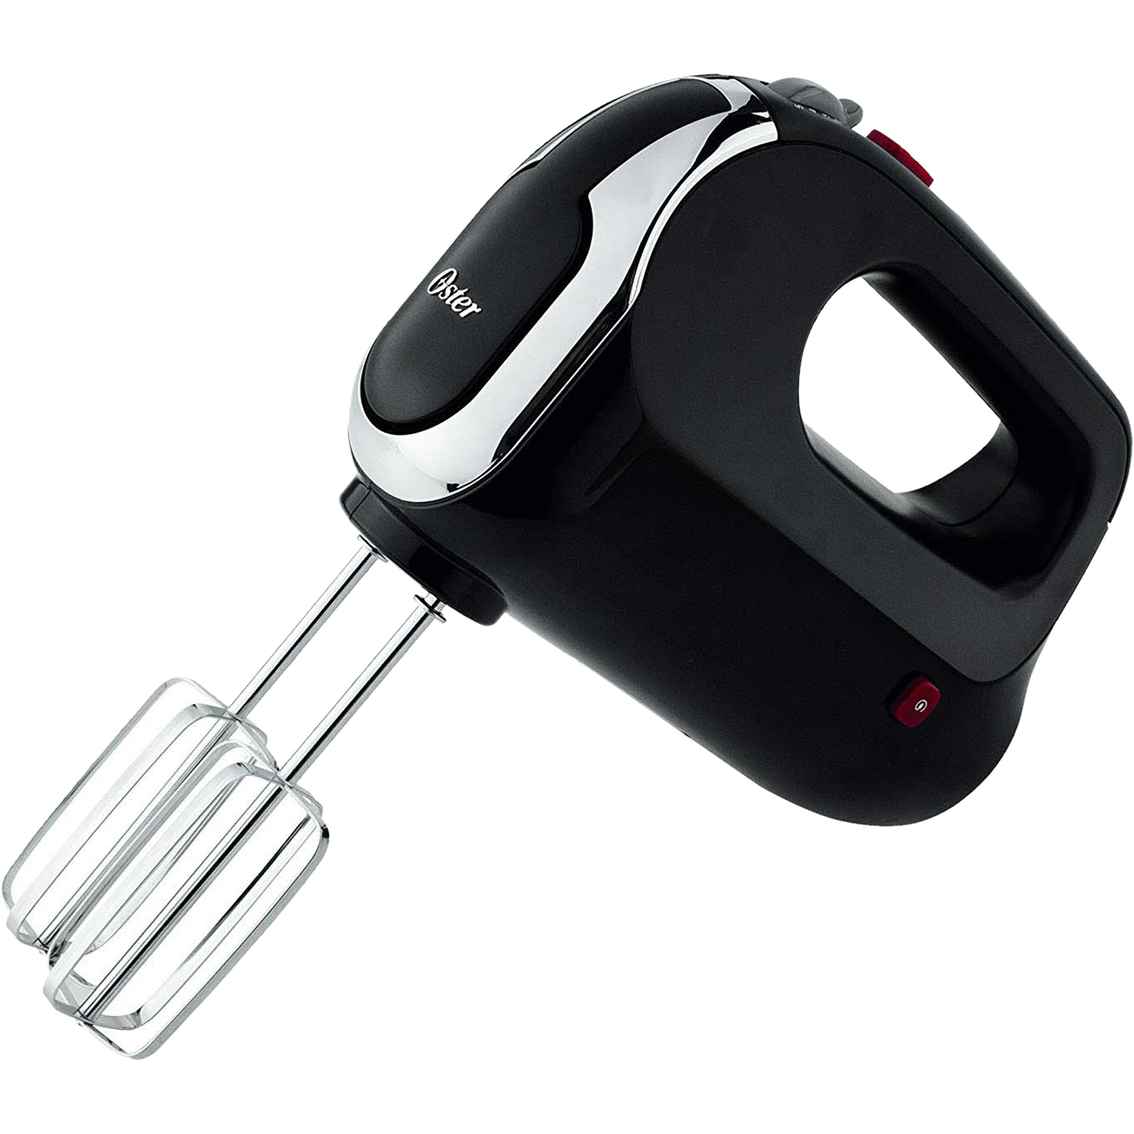 Oster 5 Speed Hand Mixer with Storage Case - Image 1 of 6